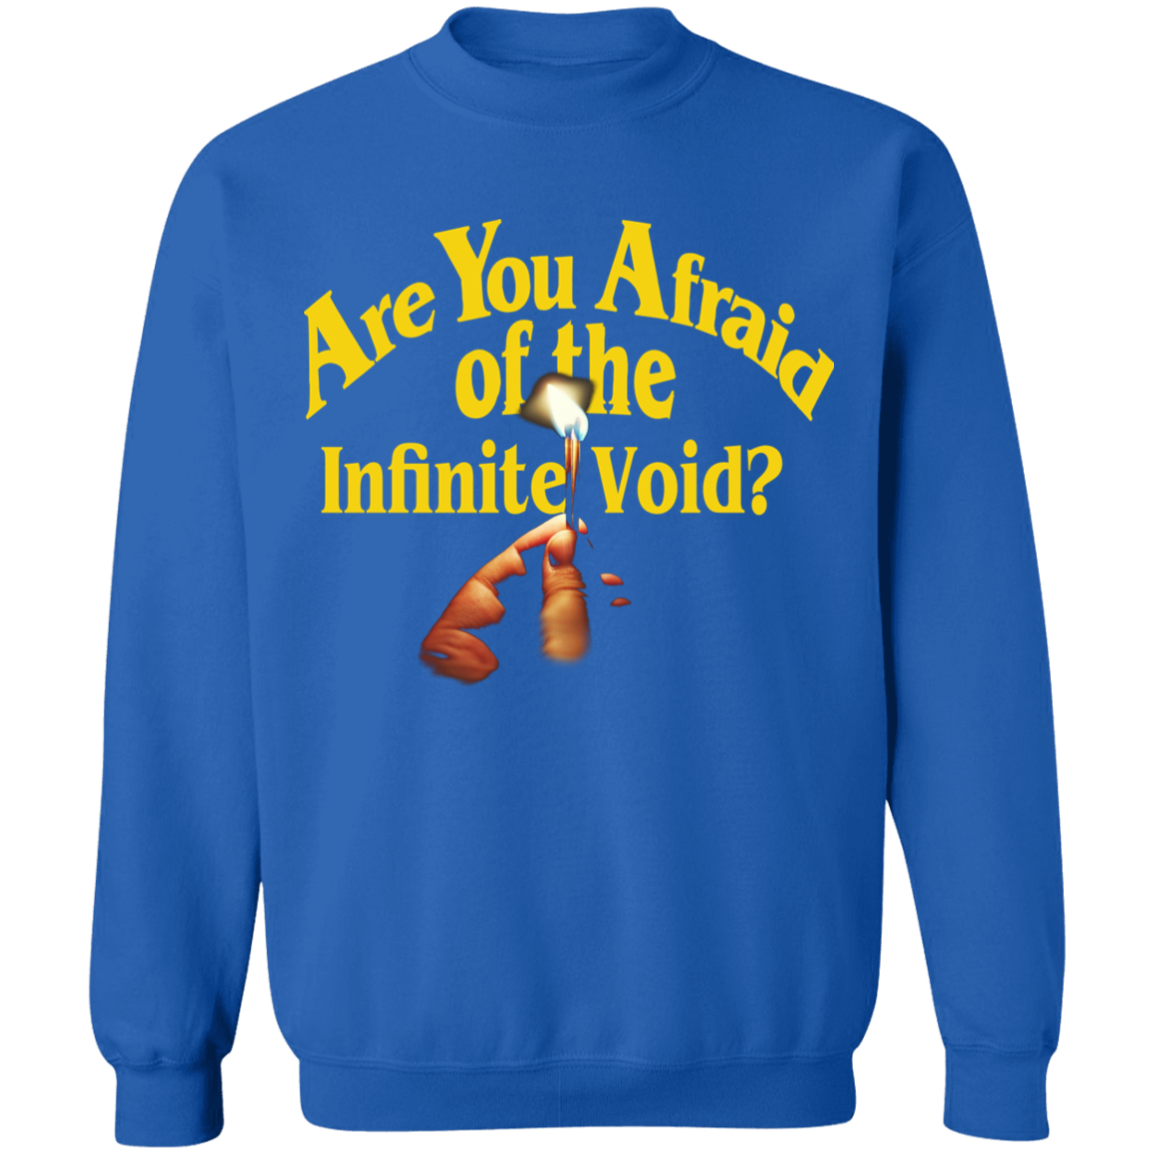 Are You Afraid of the Infinite Void? Crewneck Jumper